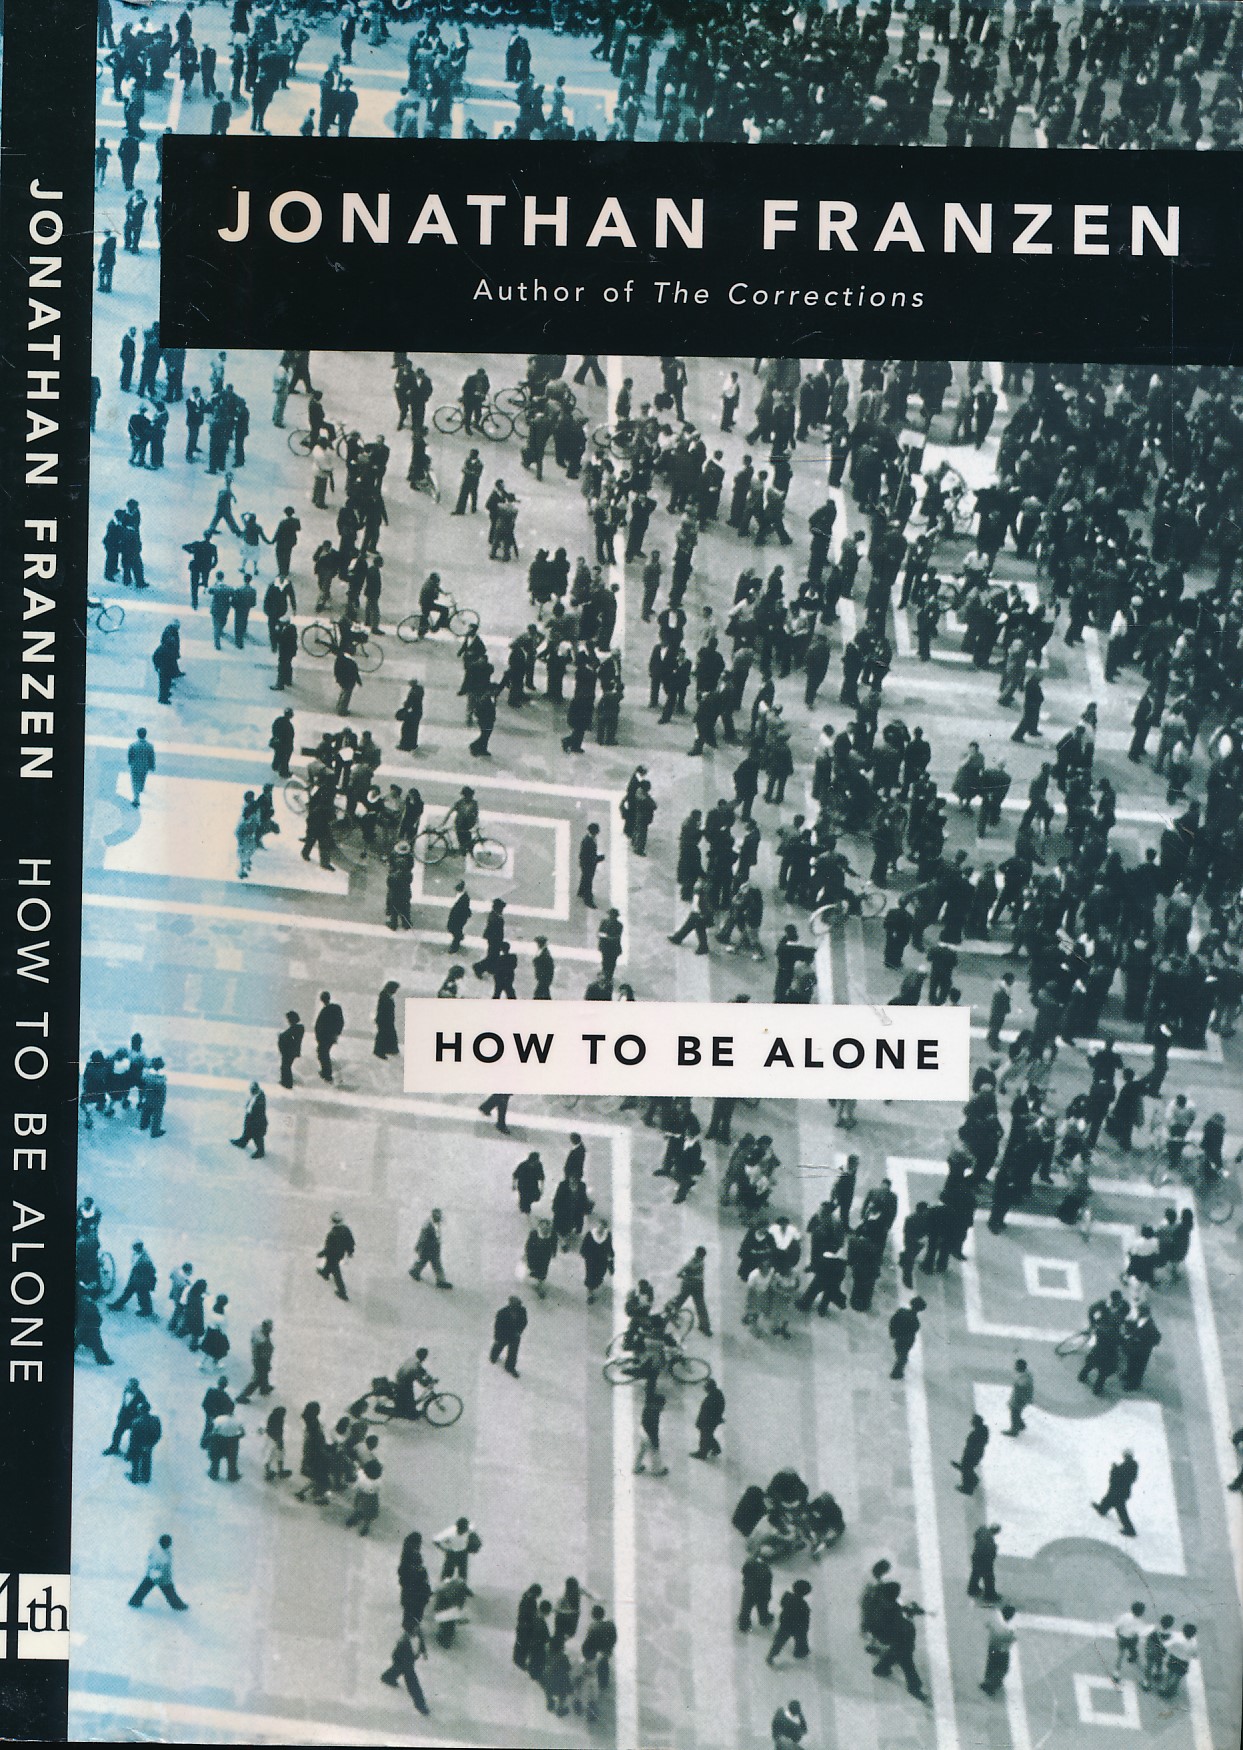 How To Be Alone. Essays. Signed Copy.